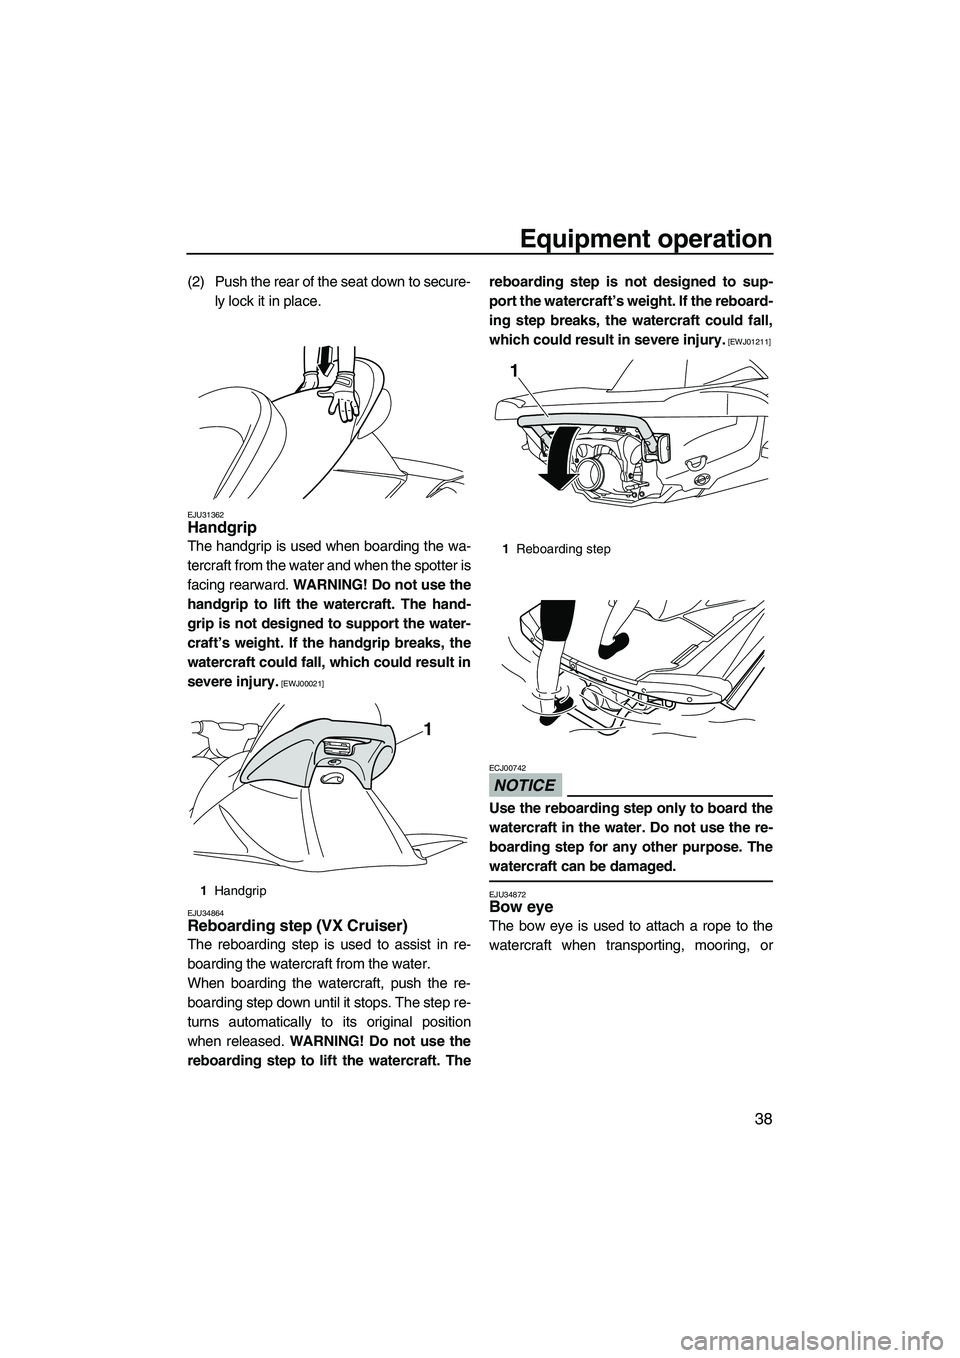 YAMAHA VX SPORT 2010 Service Manual Equipment operation
38
(2) Push the rear of the seat down to secure-
ly lock it in place.
EJU31362Handgrip 
The handgrip is used when boarding the wa-
tercraft from the water and when the spotter is
f